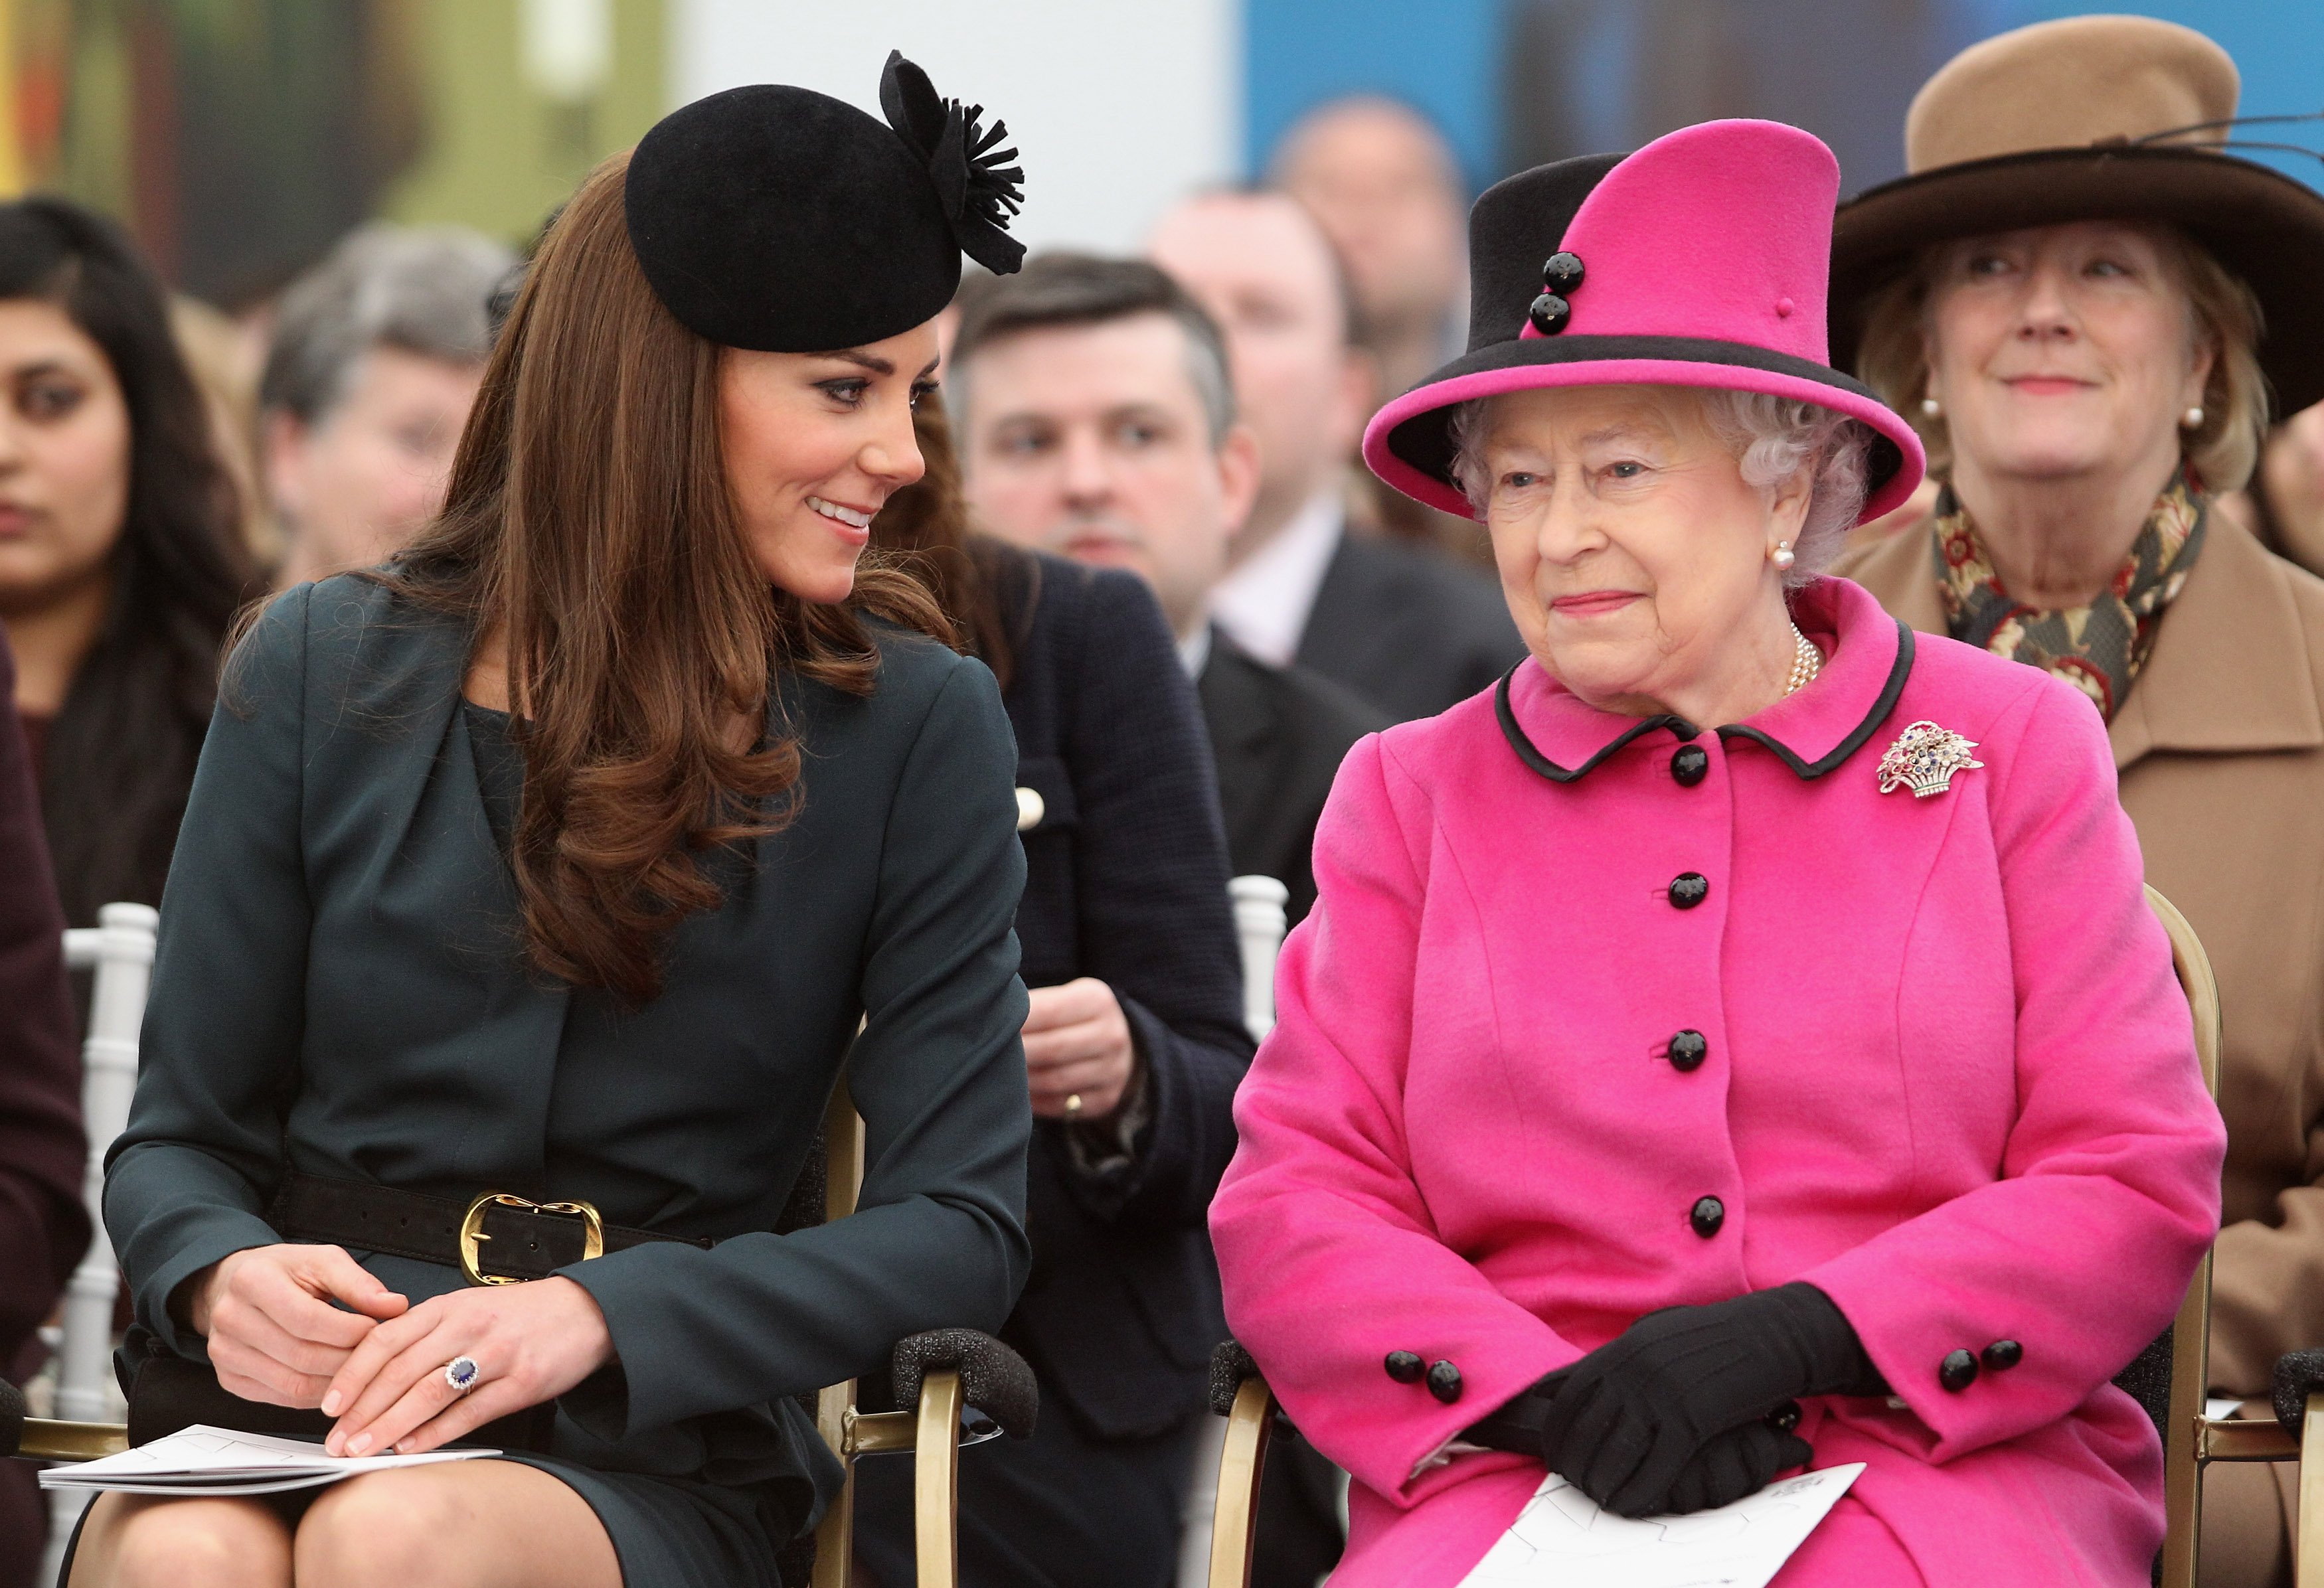 Queen Elizabeth II and Kate Middleton sitting together and watching a fashion show during a joint royal engagement